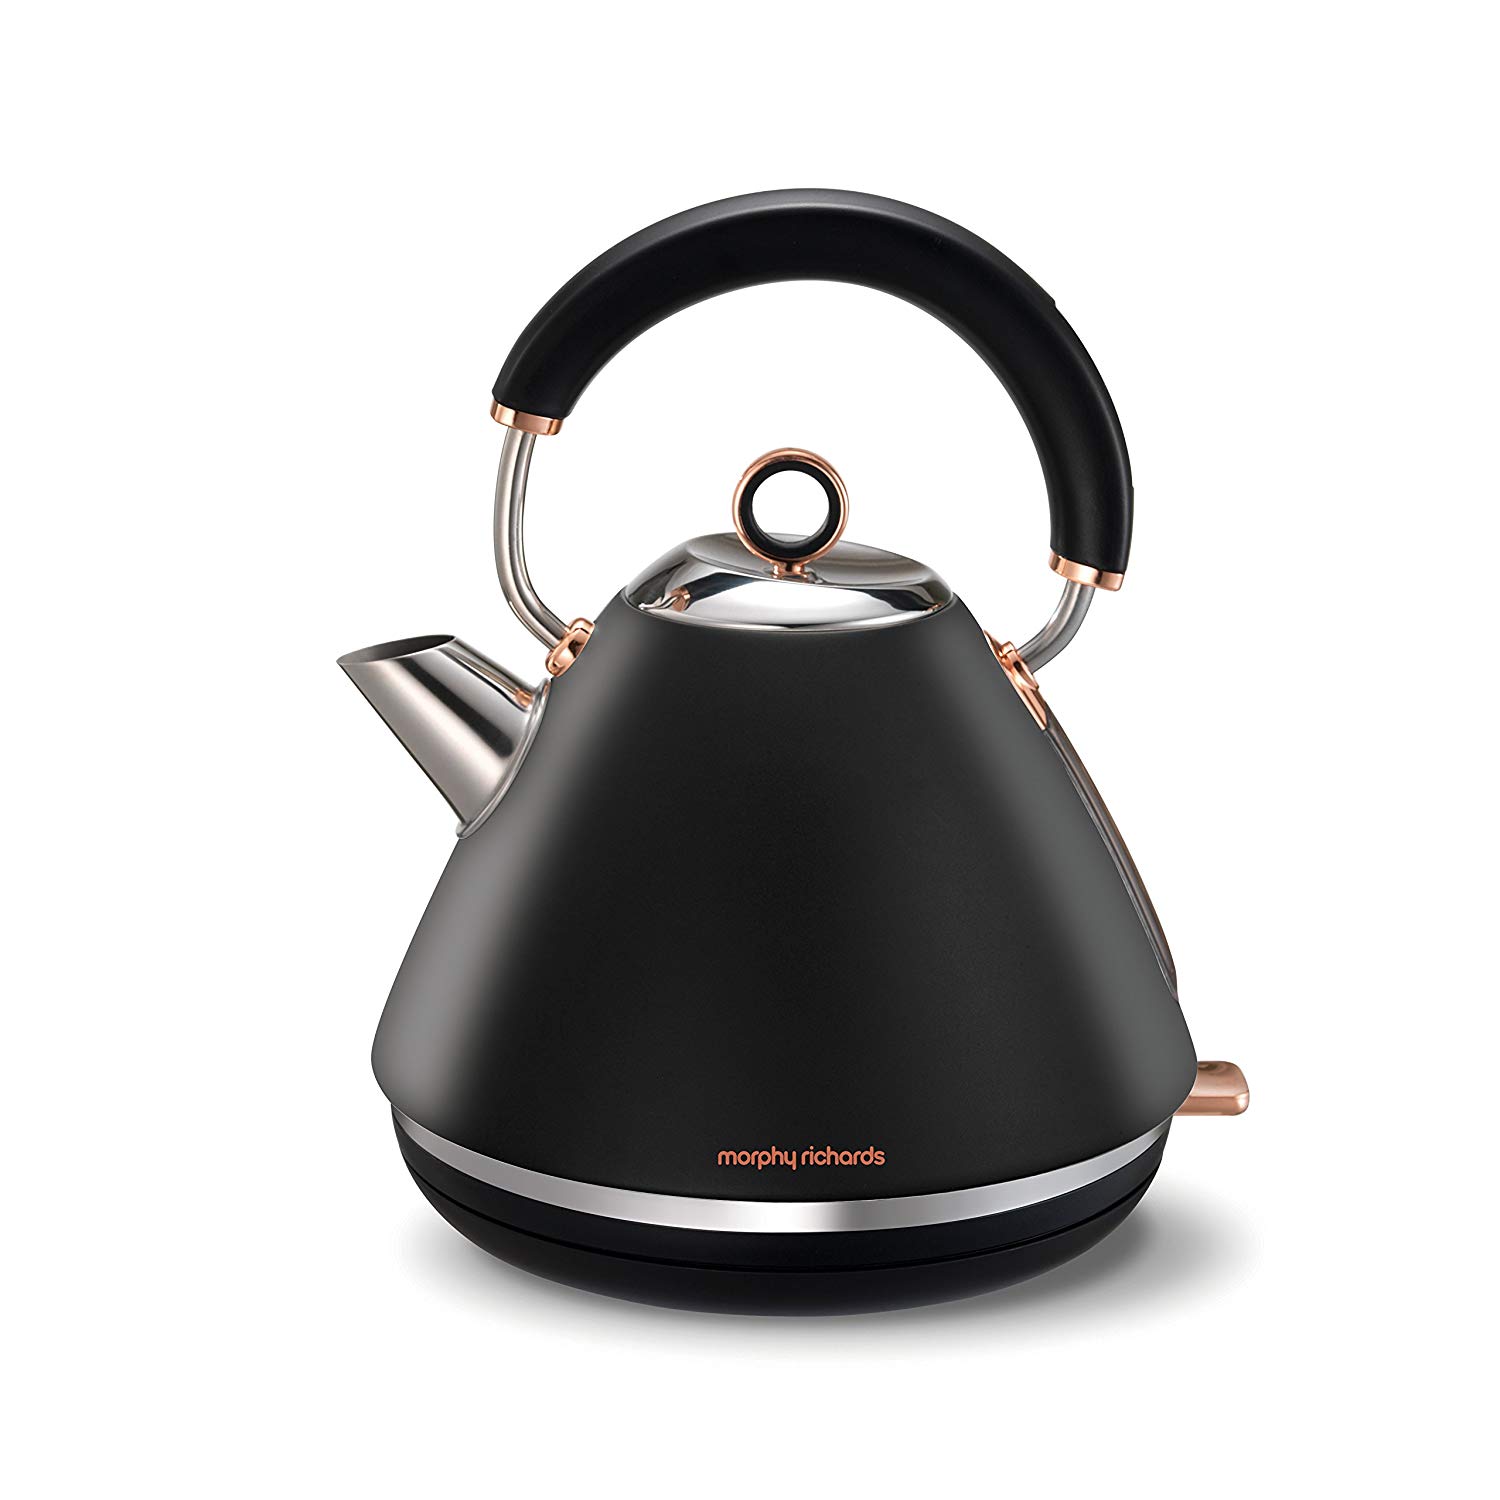 Morphy Richards Kettle Accents Black Pink Gold